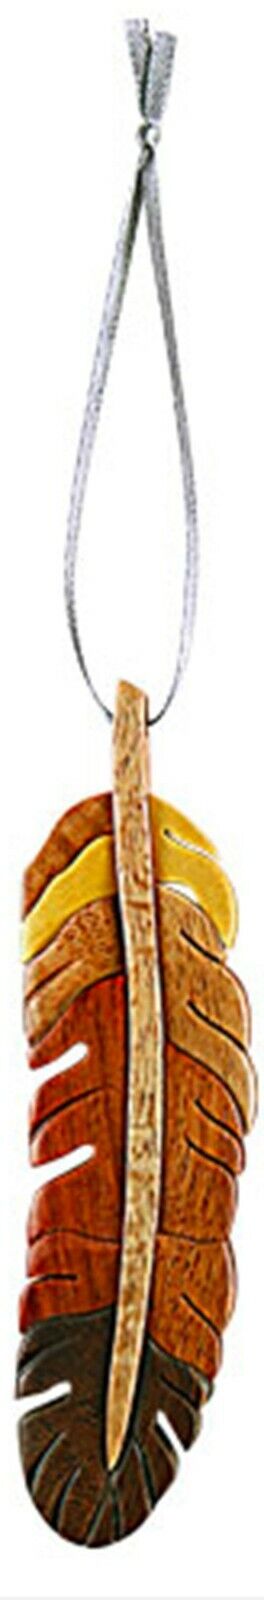 Feather - Double-sided Wood Intarsia Christmas Tree Ornament - High Honor Symbol